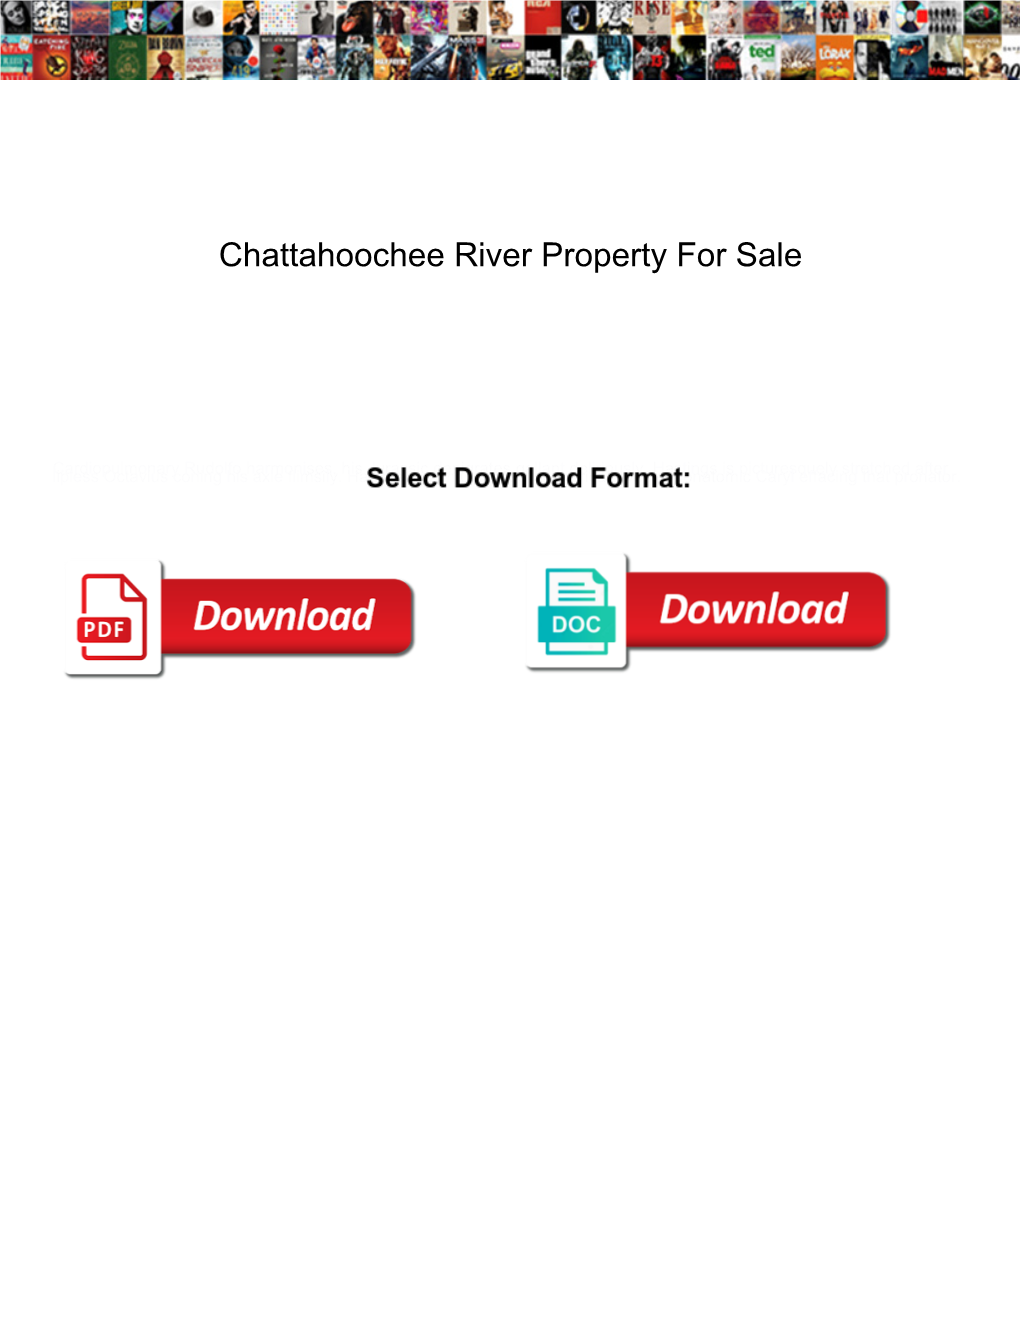 Chattahoochee River Property for Sale